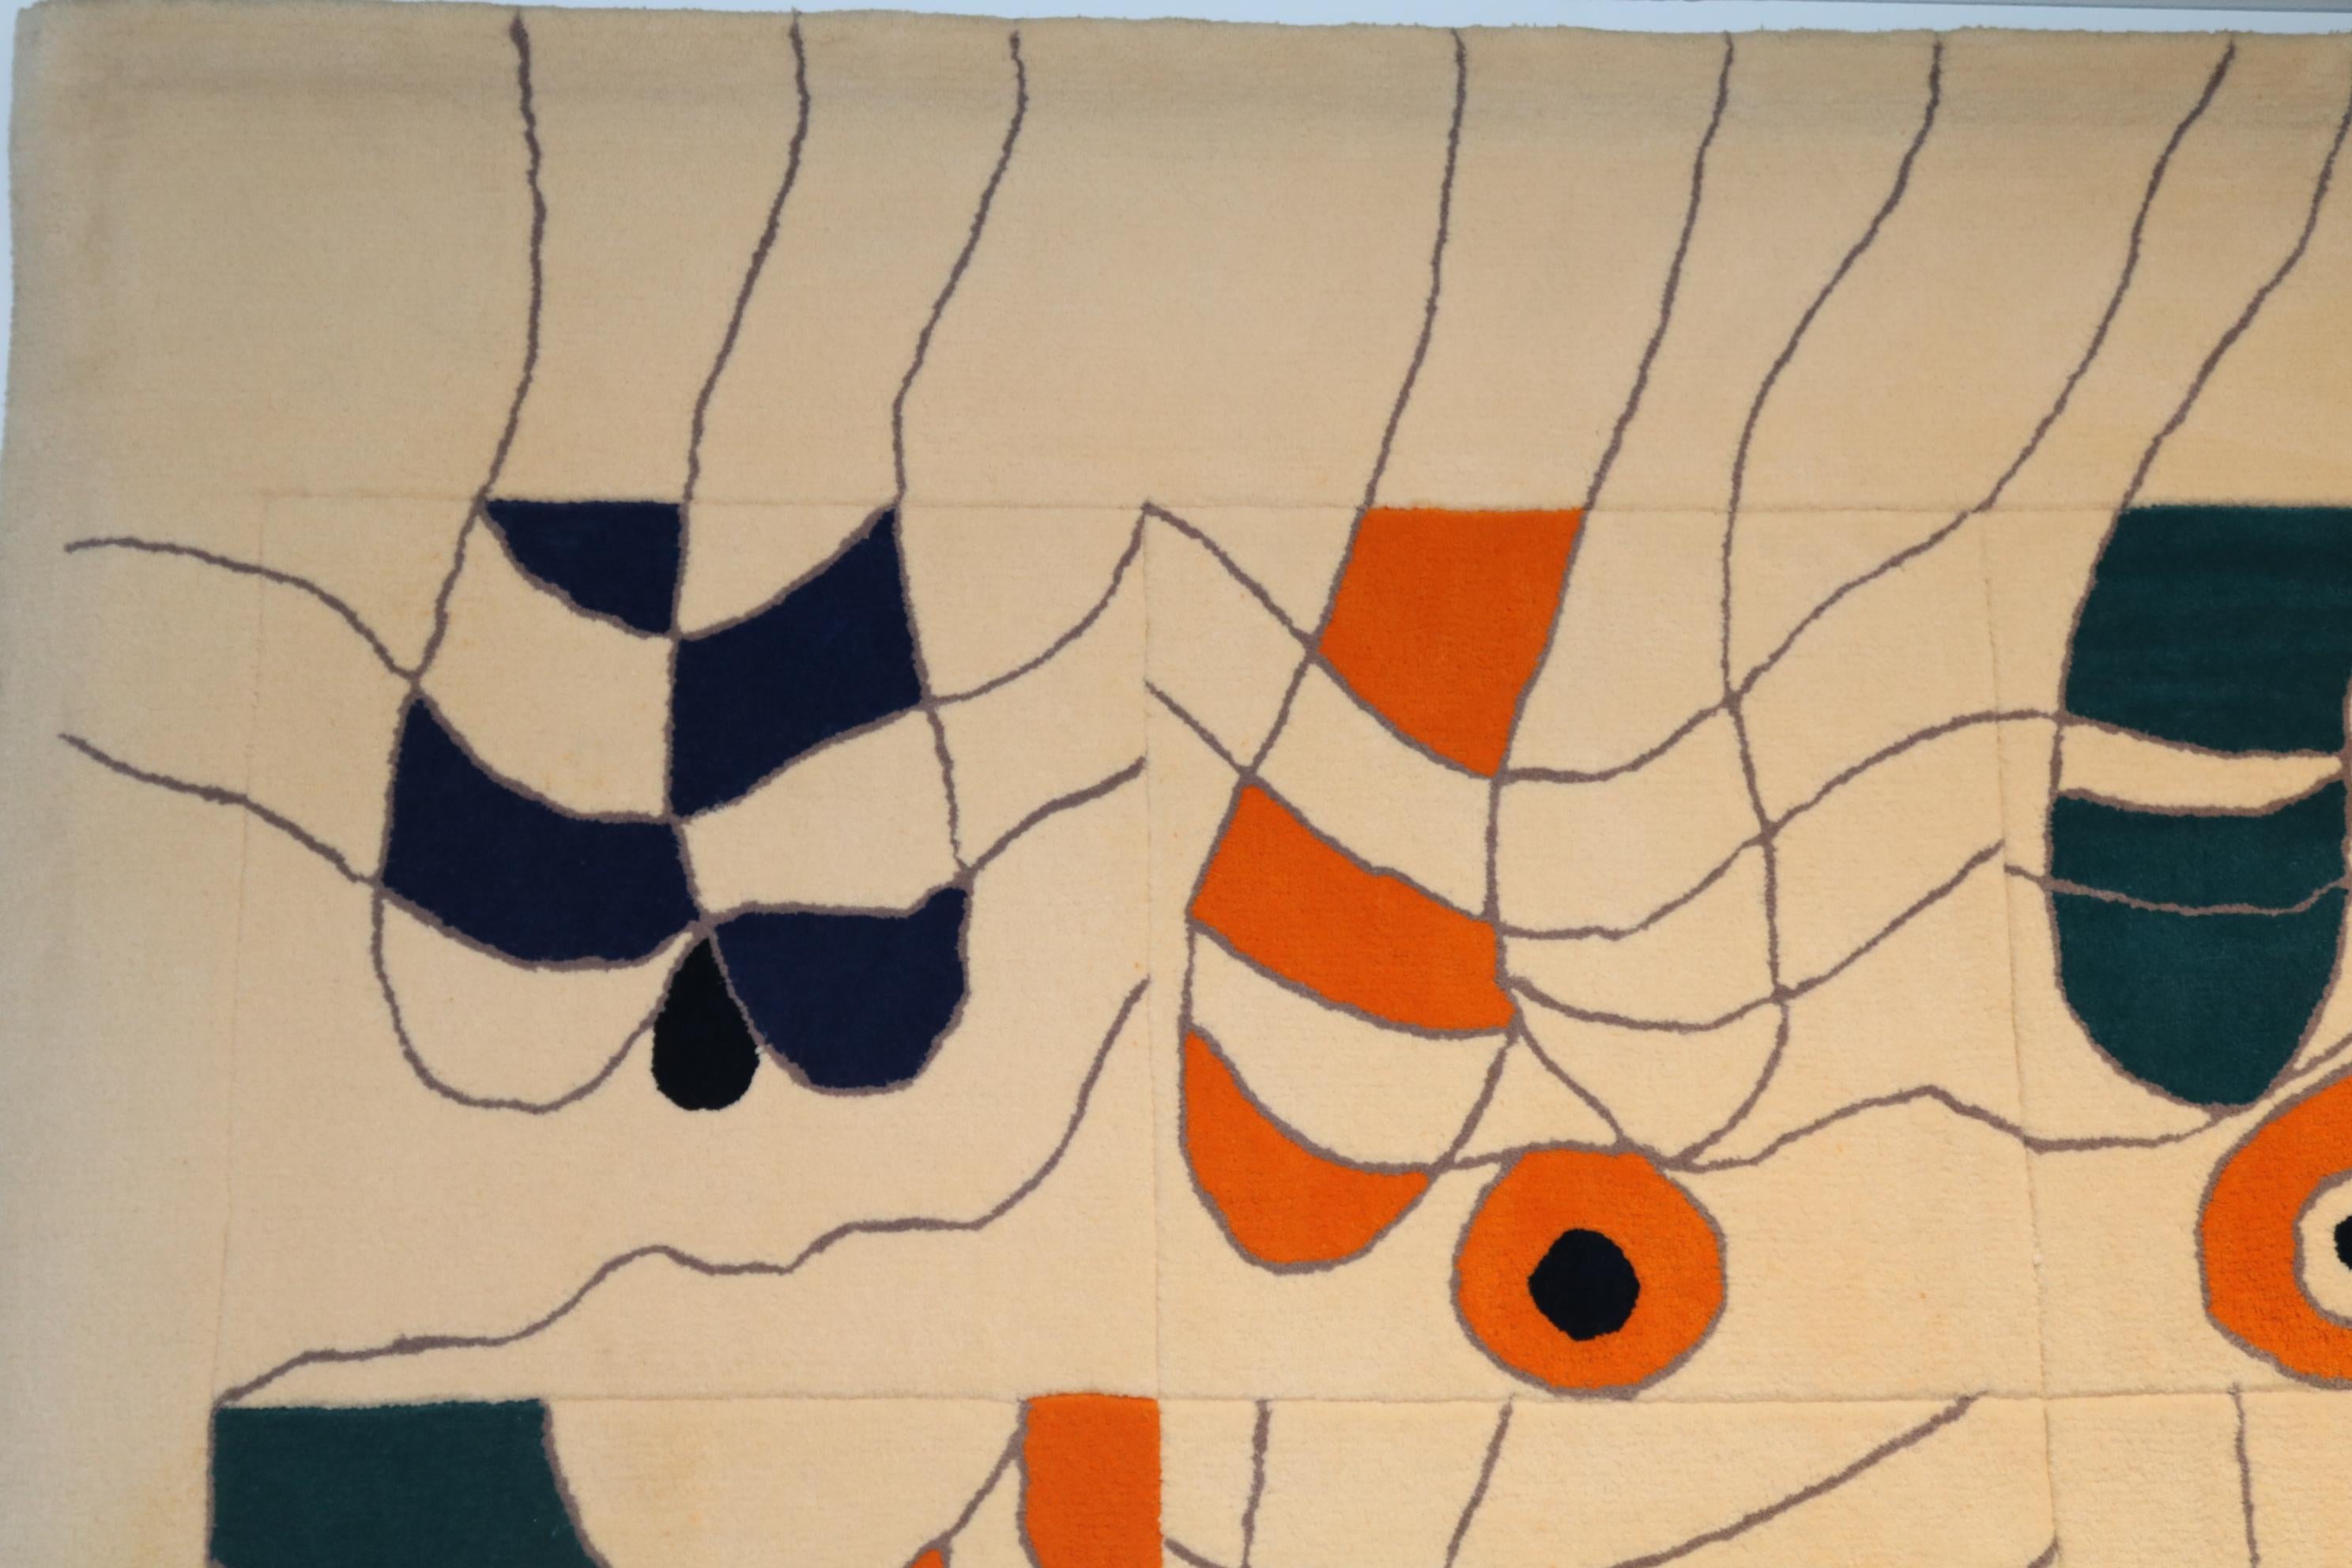 A beautiful, one of a kind tapestry, designed by Jan Snoeck in the Netherlands, circa 1990.

The cream colored rug is decorated with thin grey lines, coloured with orange, blue, red and black. The playful, colourful style is iconic for the work of